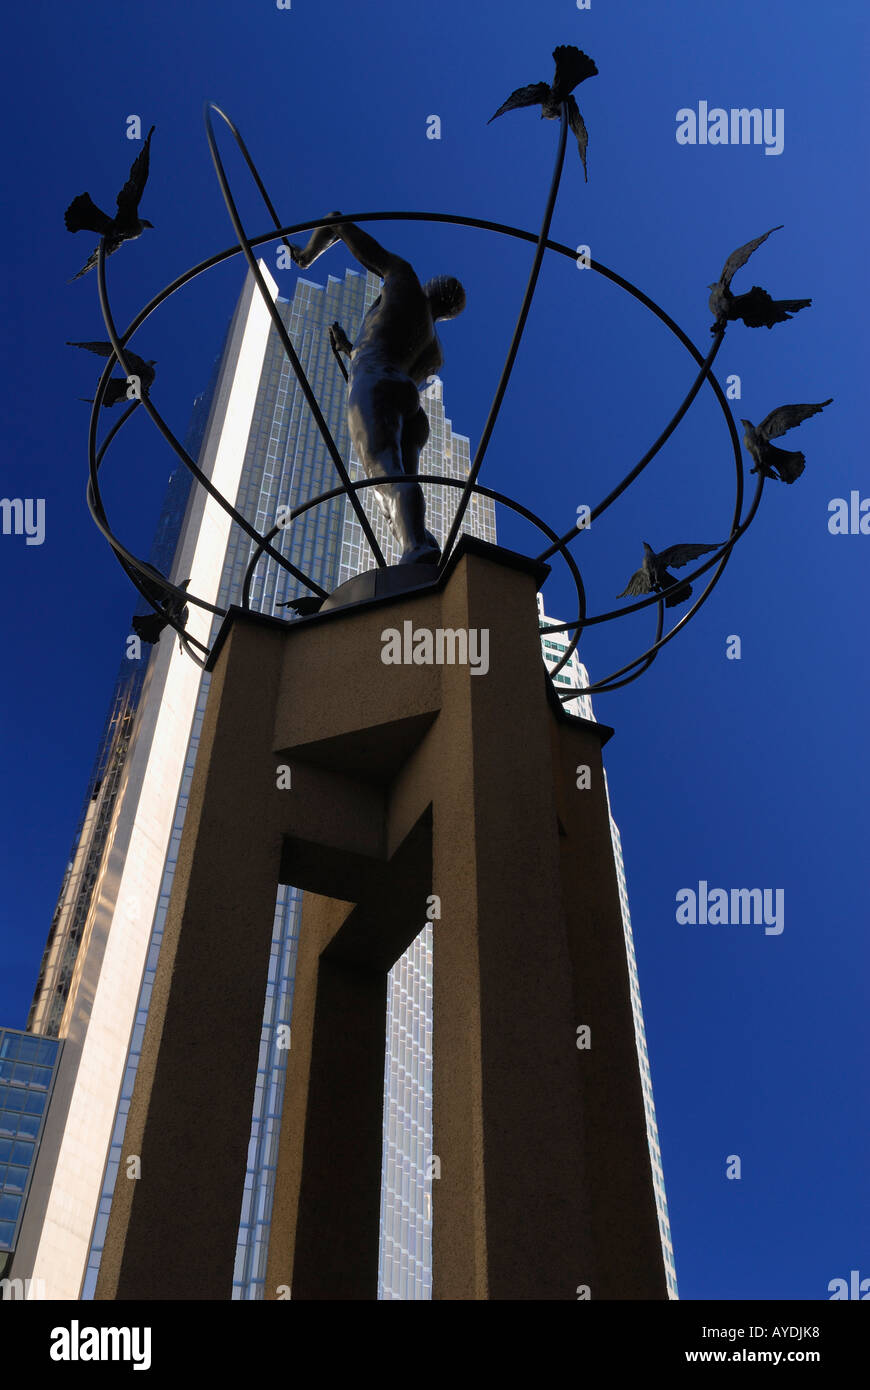 Toronto sculpture of man building a peaceful world with doves and gold bank tower on dark blue sky Stock Photo